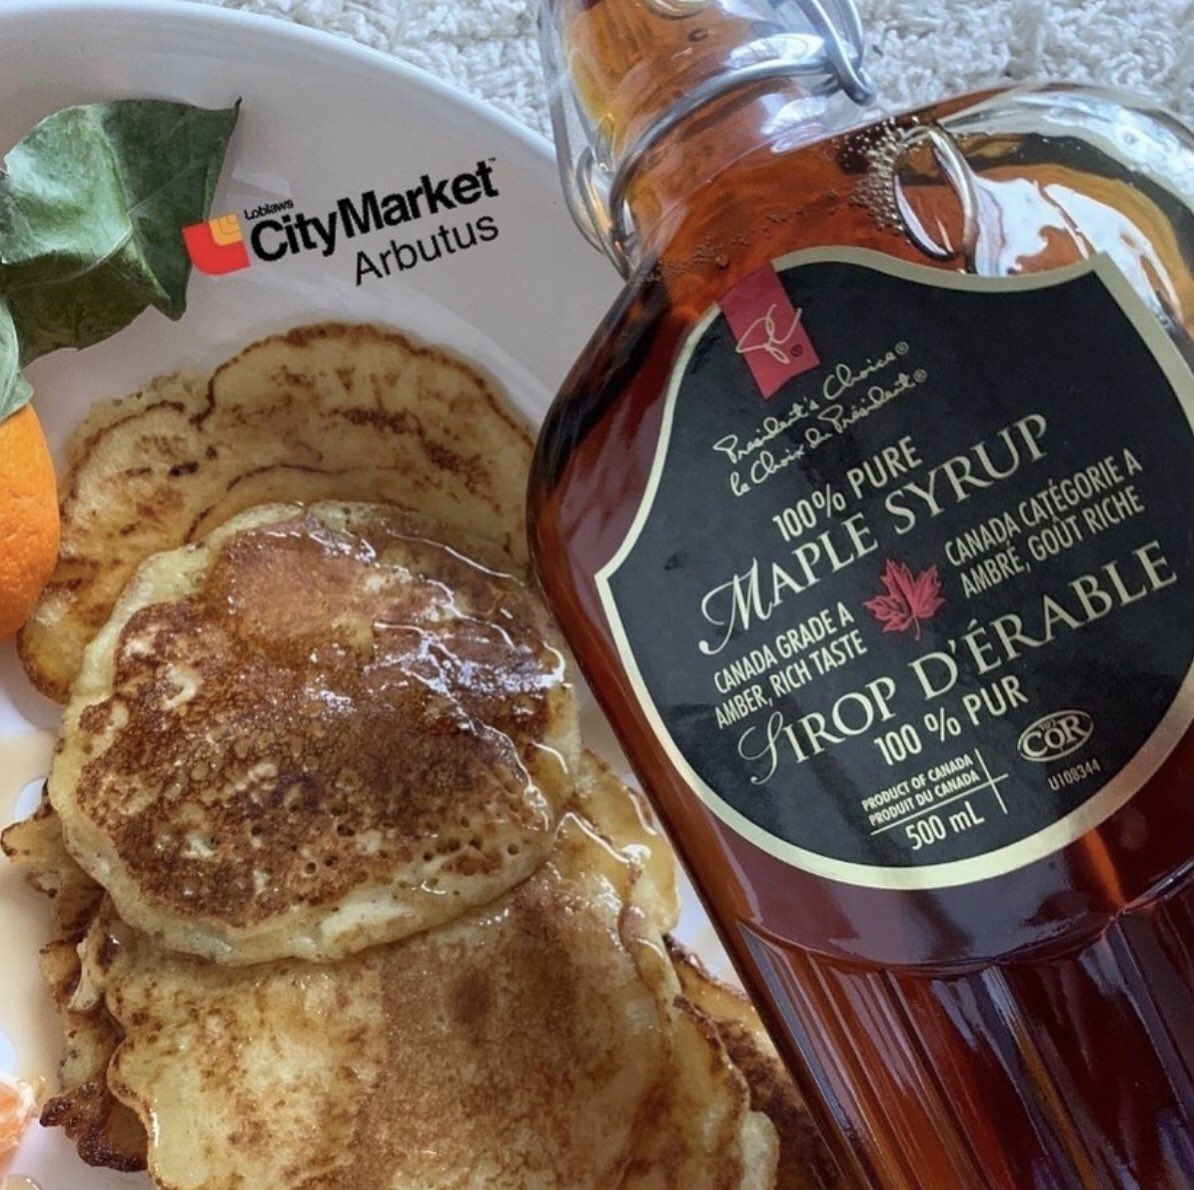 Hot pancakes 🥞 and maple 🍁 syrup = perfect cure for a rainy day.

#locallyowned #buylocal #opendaily
#foodloversunite  #locallyowned #eattogether 🥘  #welovefood ♥️ #groceryshopping #grocerystore #grocerylist 🛒 #citymarketarbutus 

#readytoeat #madefresh #shopinstore 📌